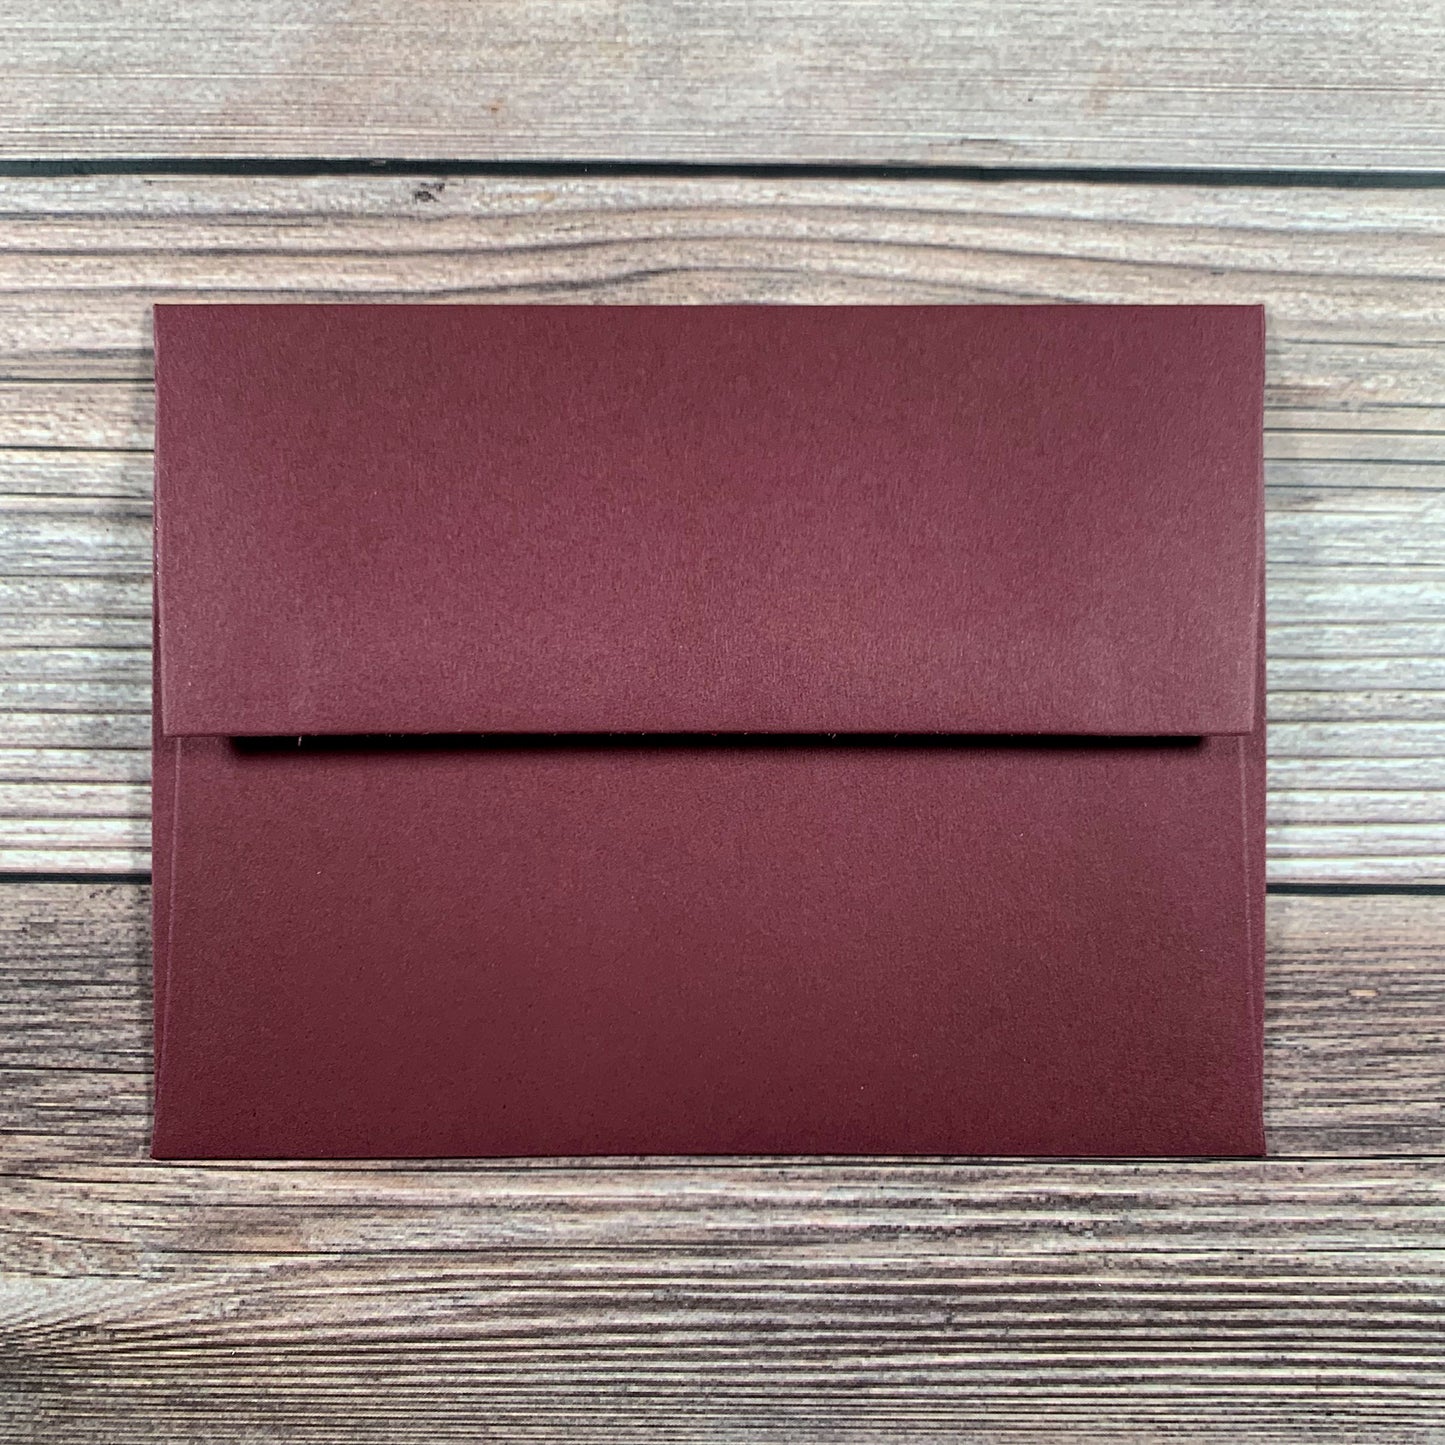 Greeting Card envelope, burgundy color, square flap, included with letterpress greeting card.